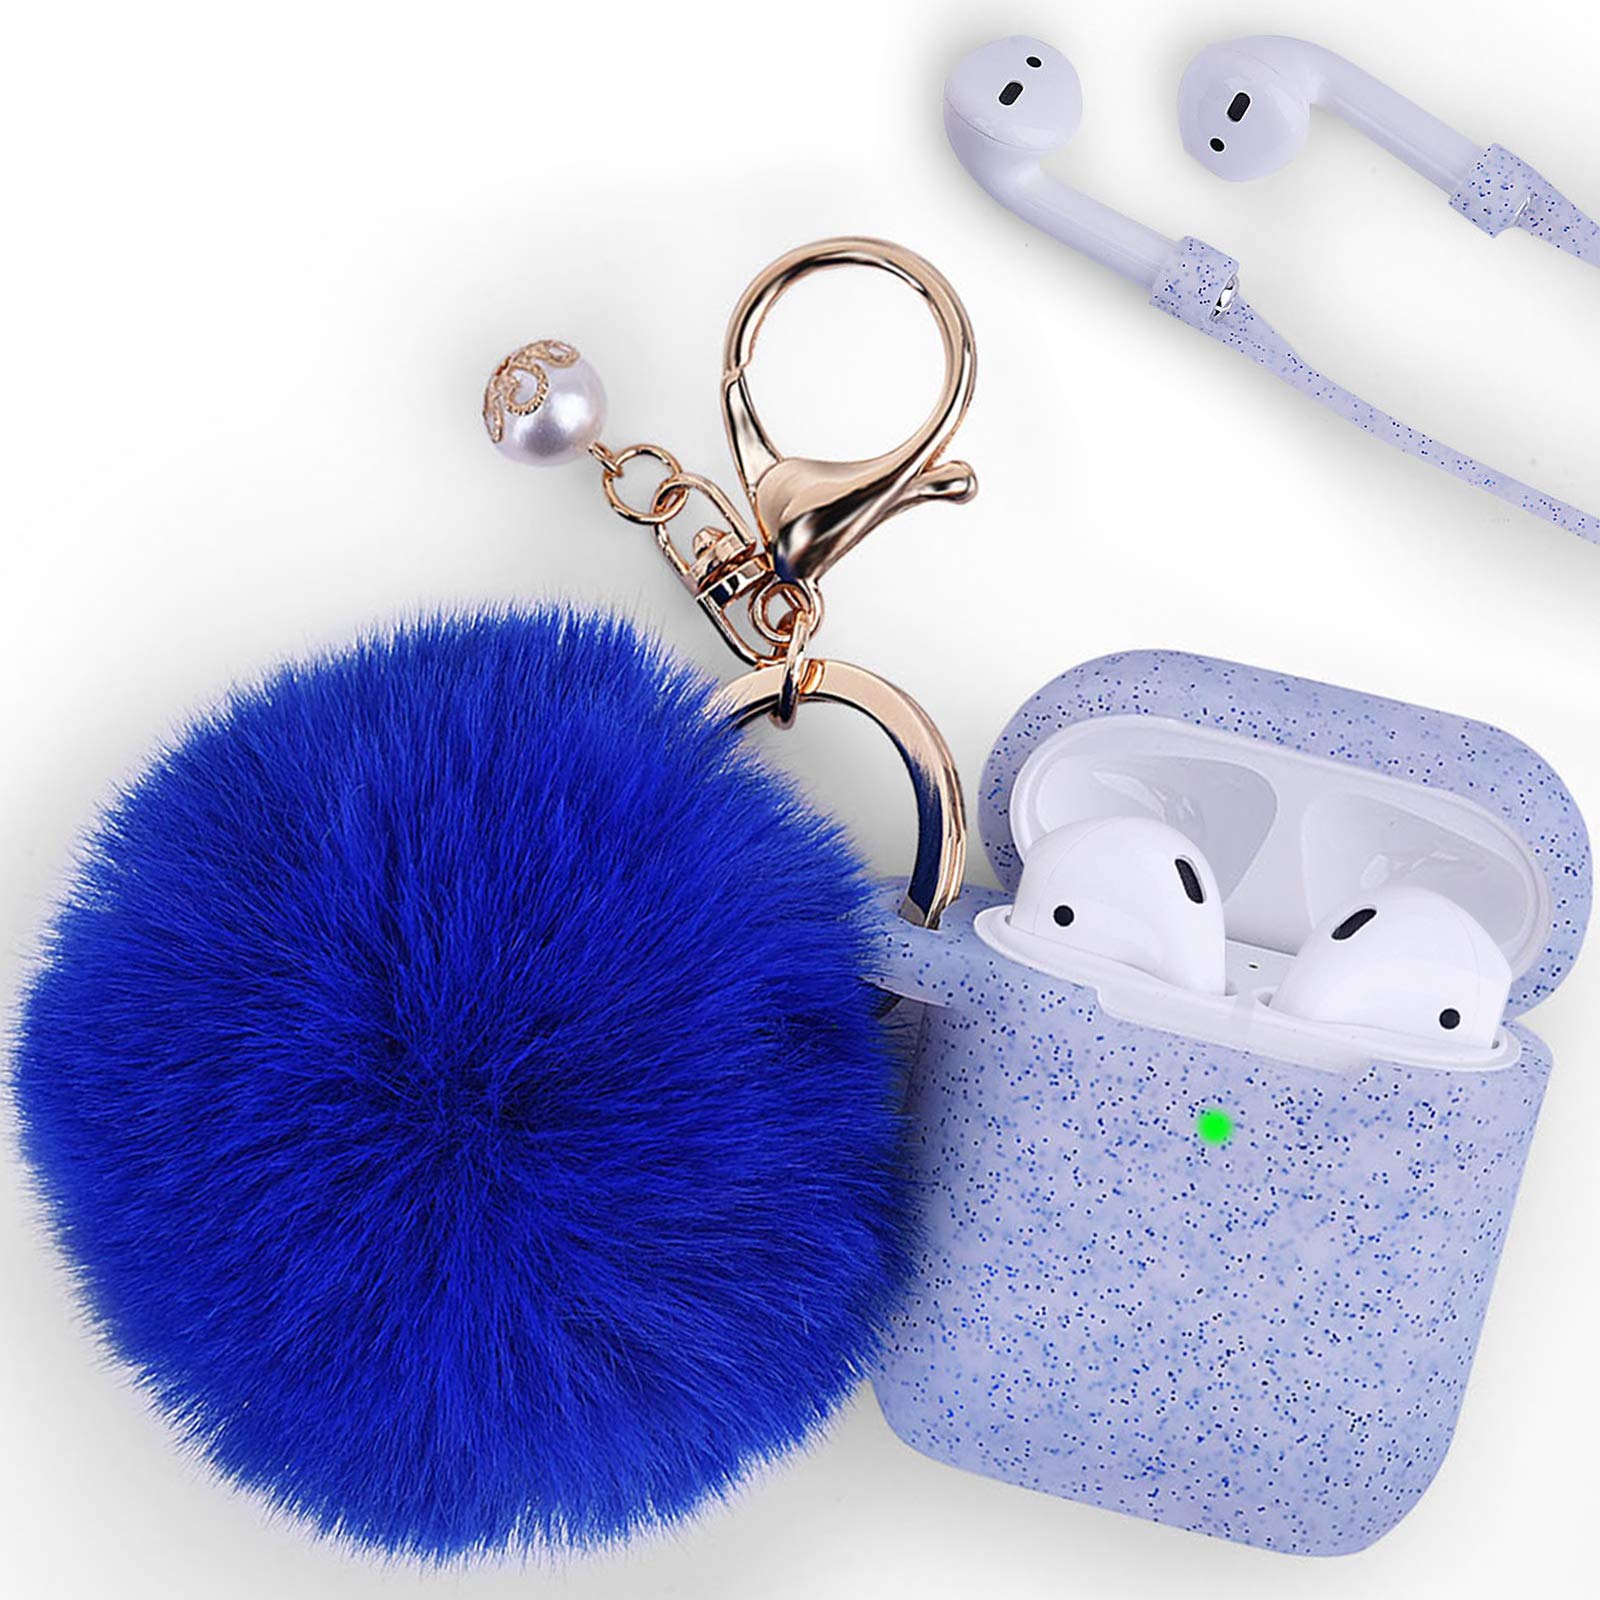 Book Cover Filoto Case for Airpods, Airpod Case Cover for Apple Airpods 2&1 Charging Case, Cute Air Pods Silicone Protective Accessories Cases/Keychain/Pompom/Strap, Best Gift for Girls and Women, Sapphire Blue